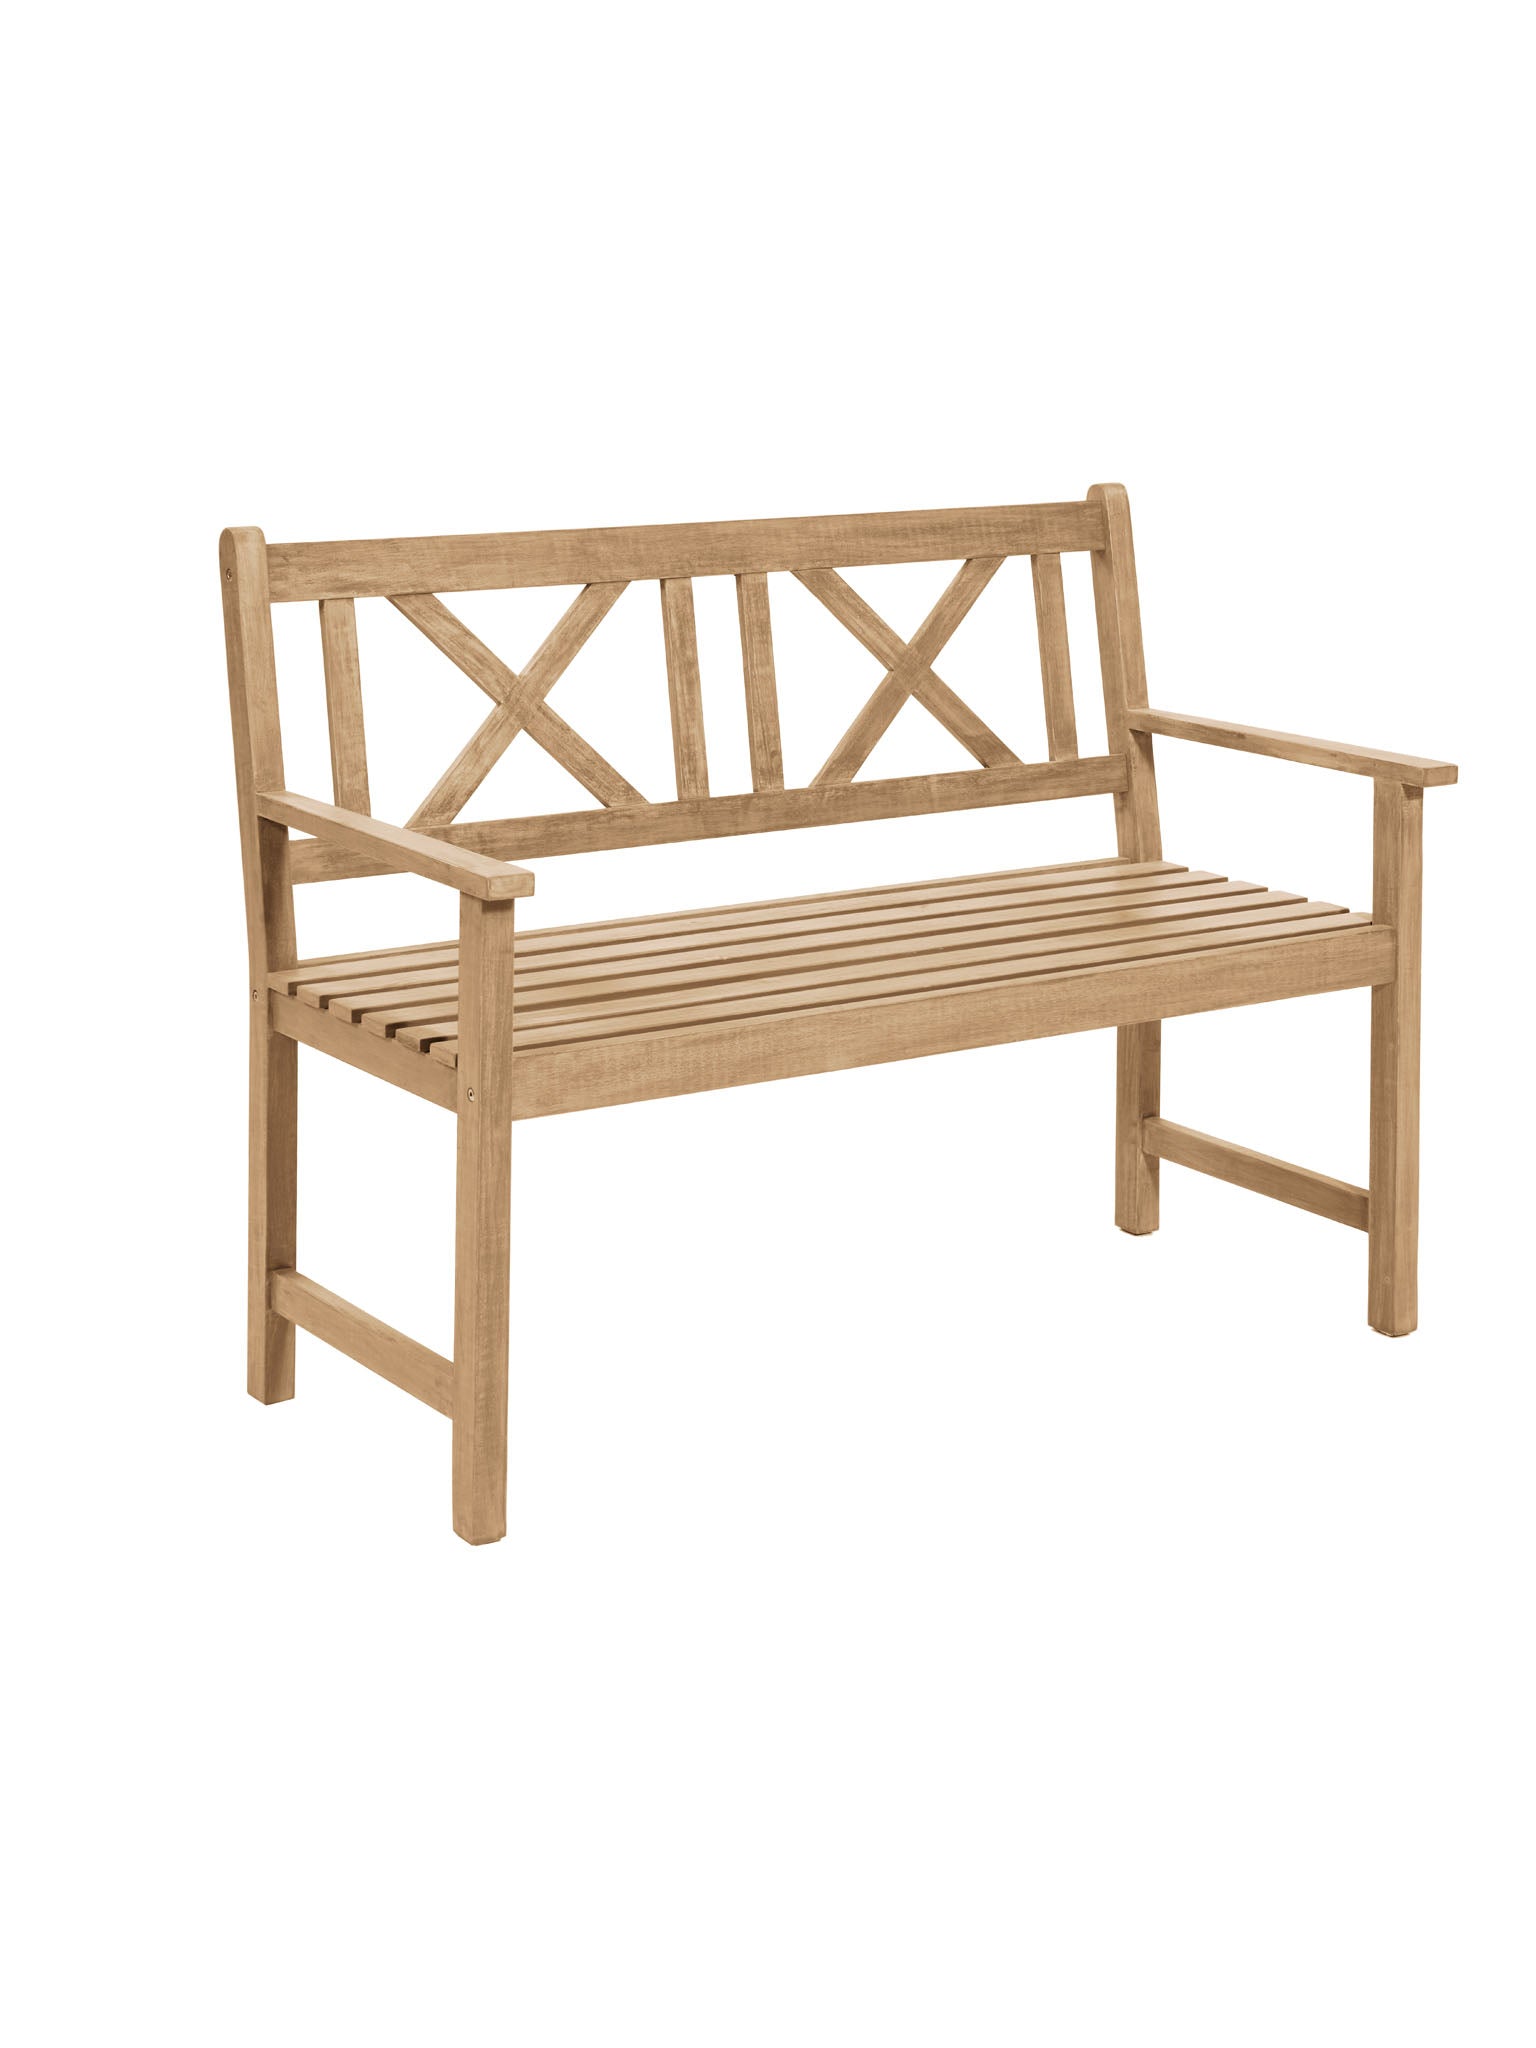 simple but classic Acacia wooden bench